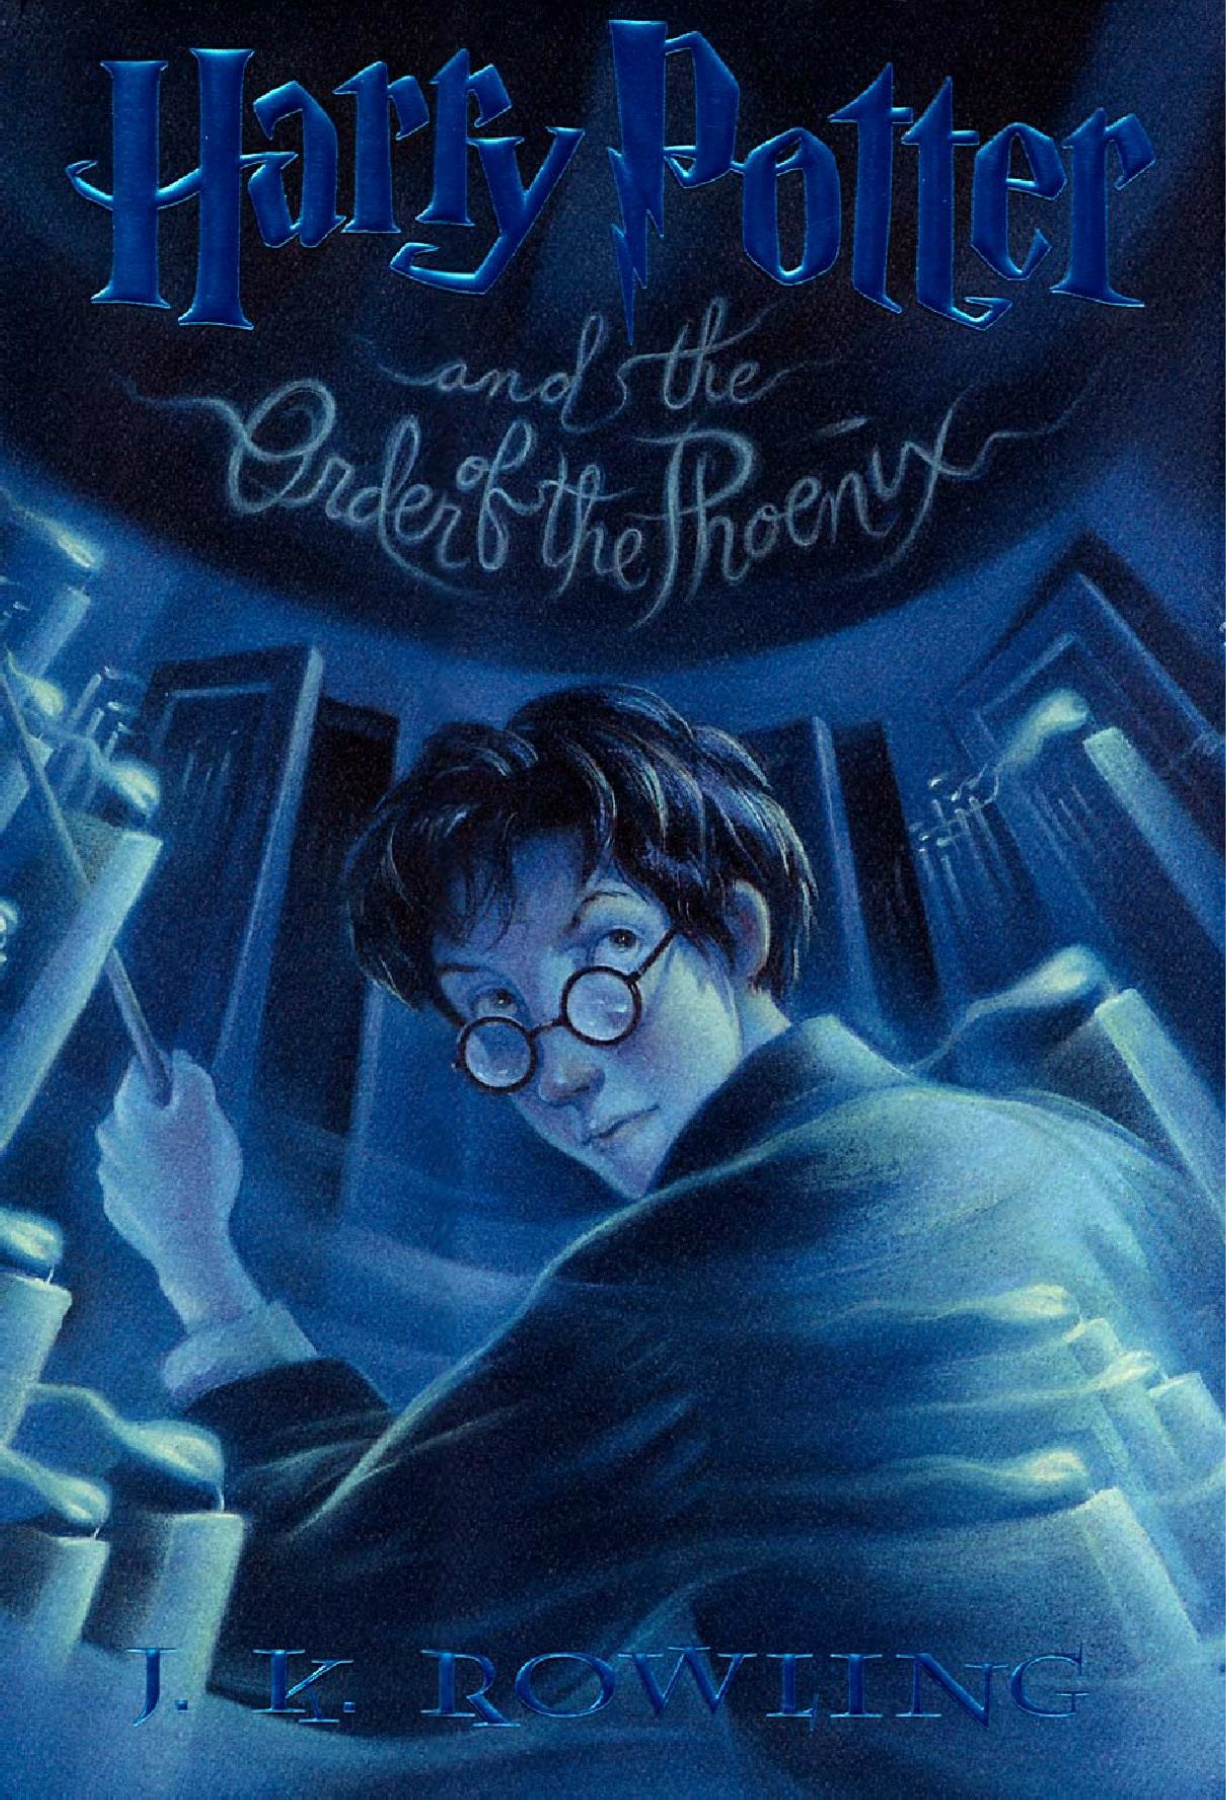 Harry potter and the order of the phoenix pdf download 18 puranas in tamil pdf free download